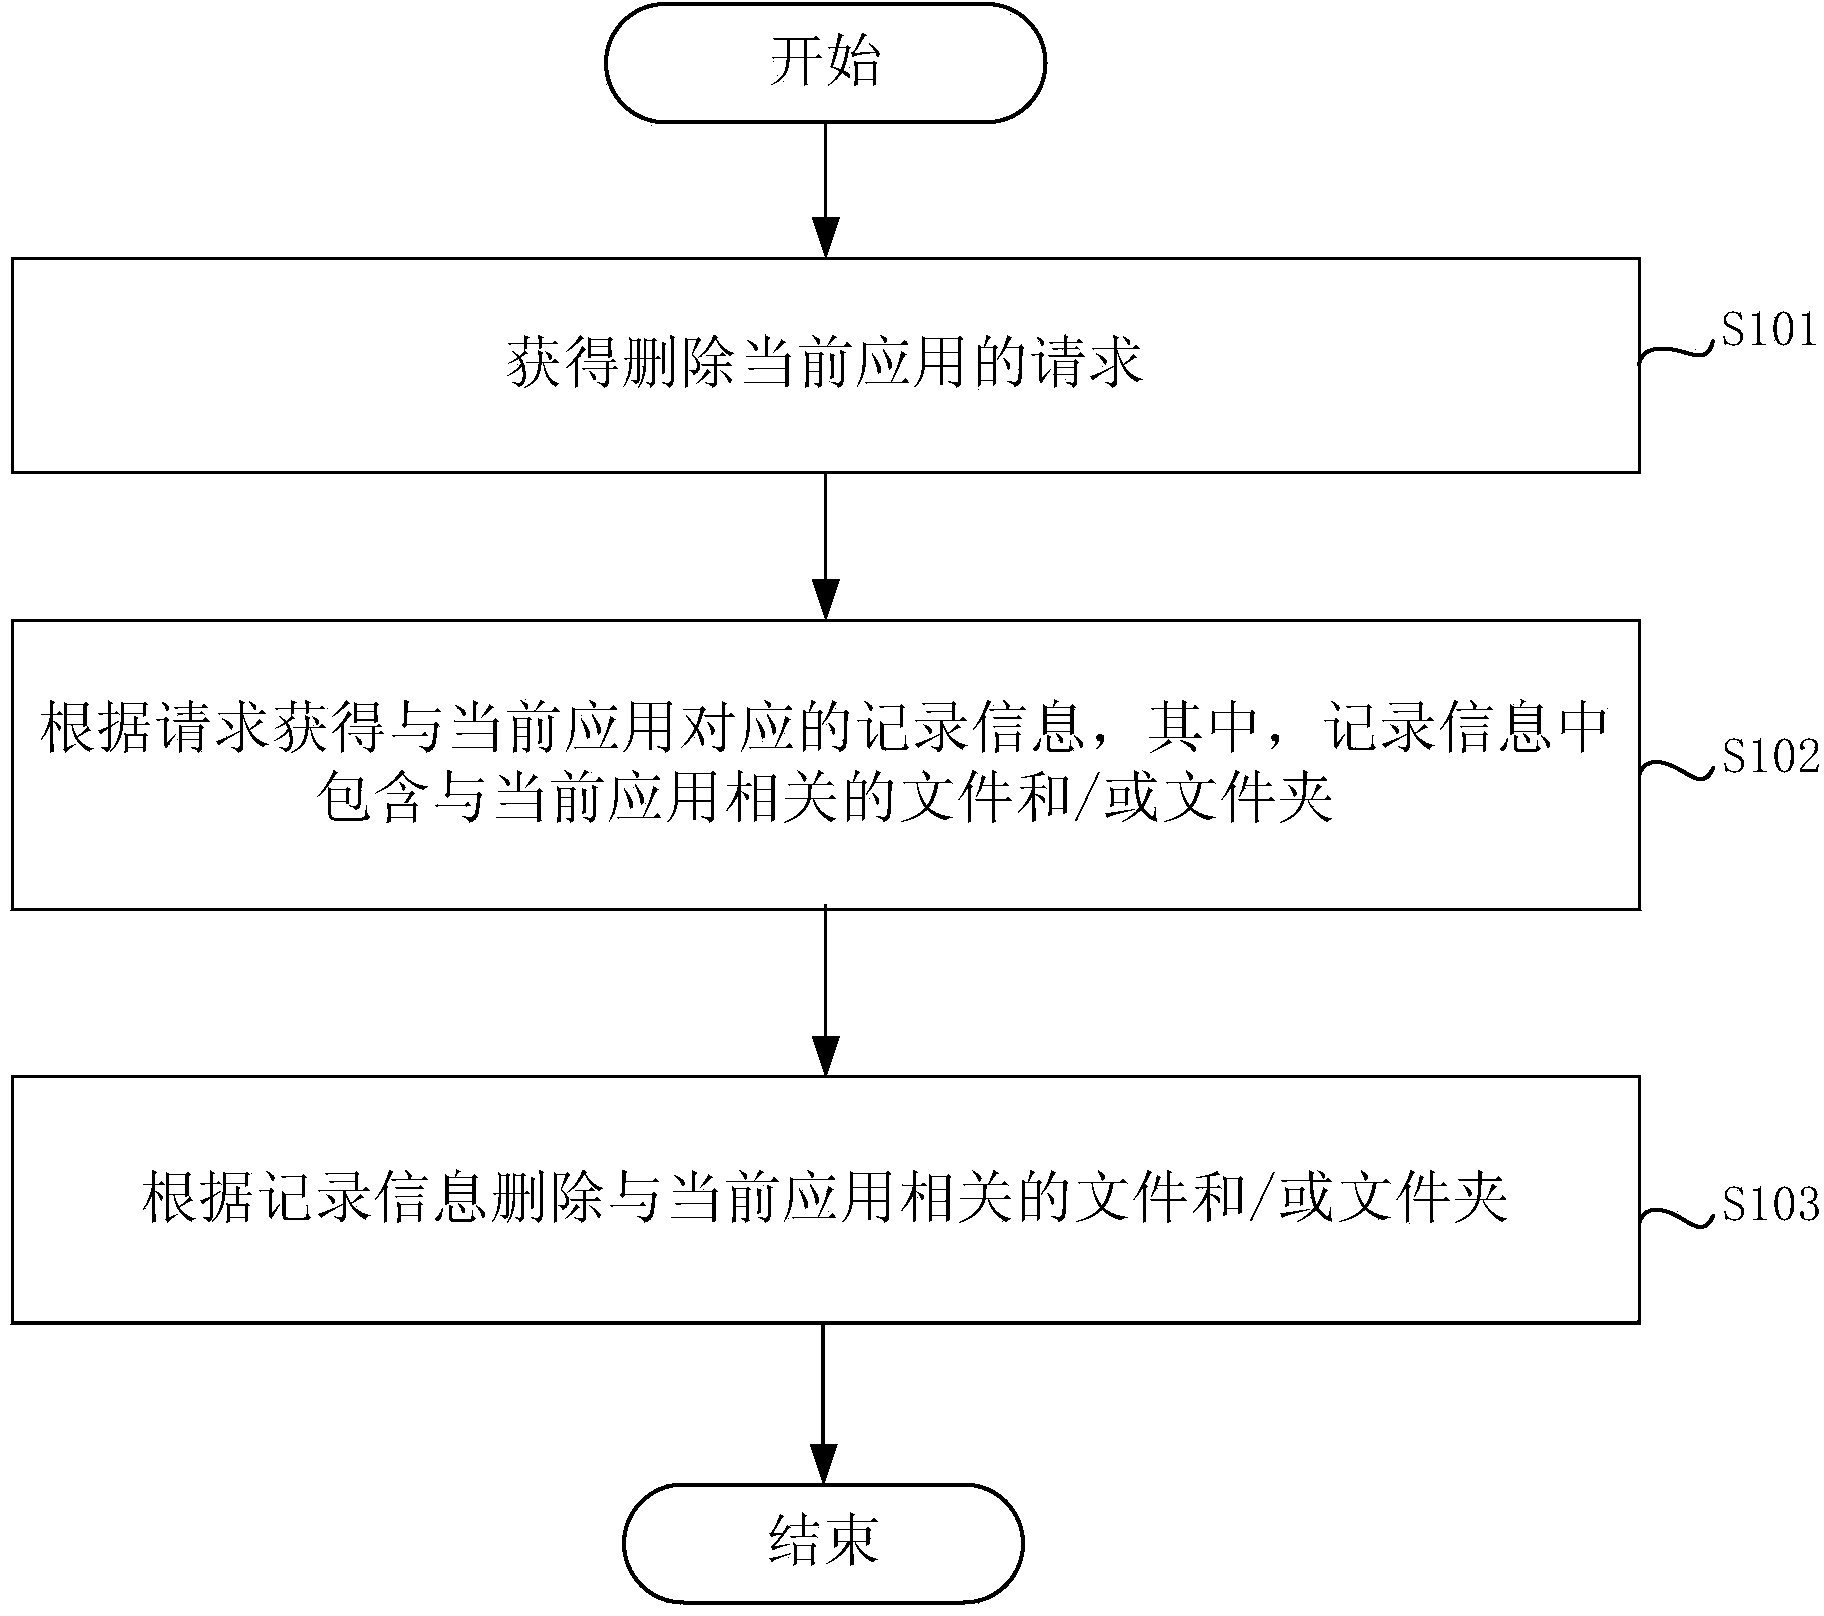 Method and device for cleaning up files